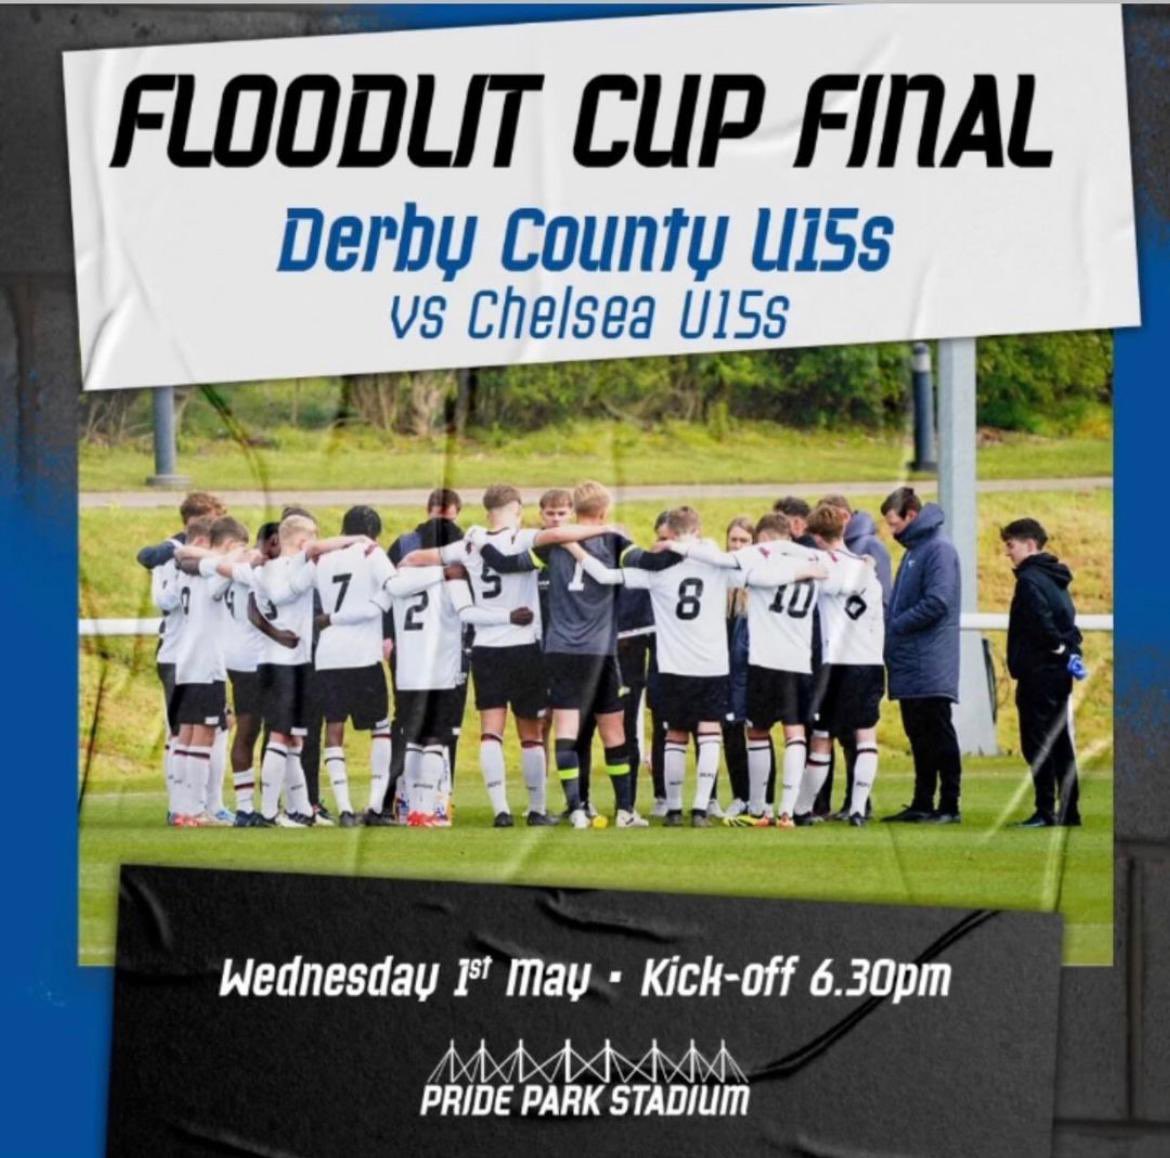 Our Under-15s are at Pride Park tonight for the Floodlit Cup final! It's a 6.30pm kick-off and free entry for their meeting with Chelsea! #DCFC #dcfcfans